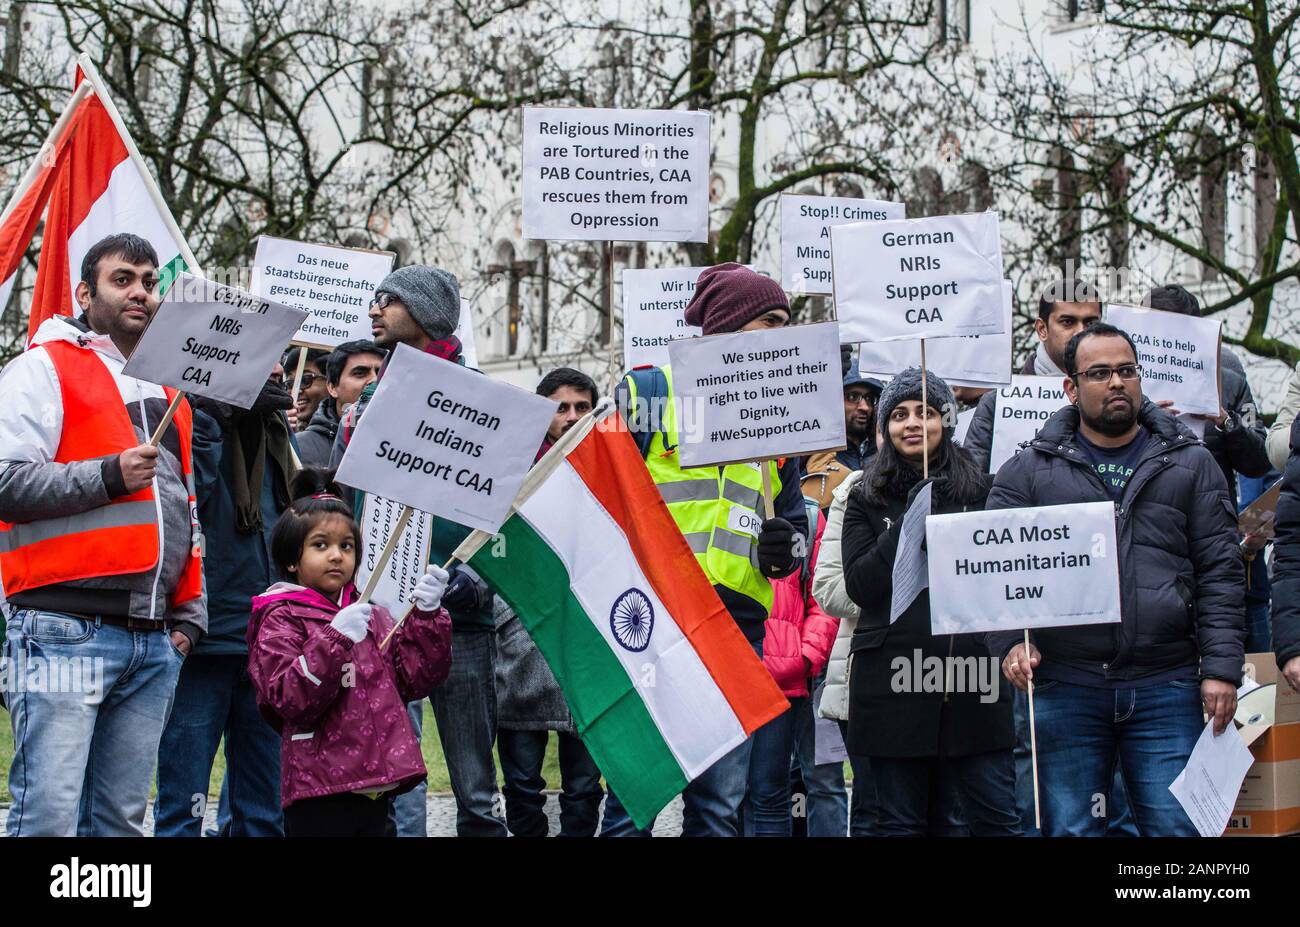 Munich, Germany. 18th Jan, 2020. A week after a group demonstrated against the so-called 'anti-Muslim law'' in India, a group from an identified organization showed support for the Indian government and the controversial Citizenship Amendment Bill assembled at Munich's Geschwister Scholl Platz. The CAB bill gives amnesty to religious minorities from Pakistan, Afghanistan and Bangladesh to migrate to India, but does not include Muslims and is an amendment to a 64 year old law that bars those illegally in India from obtaining citizenship. Credit: ZUMA Press, Inc./Alamy Live News Stock Photo